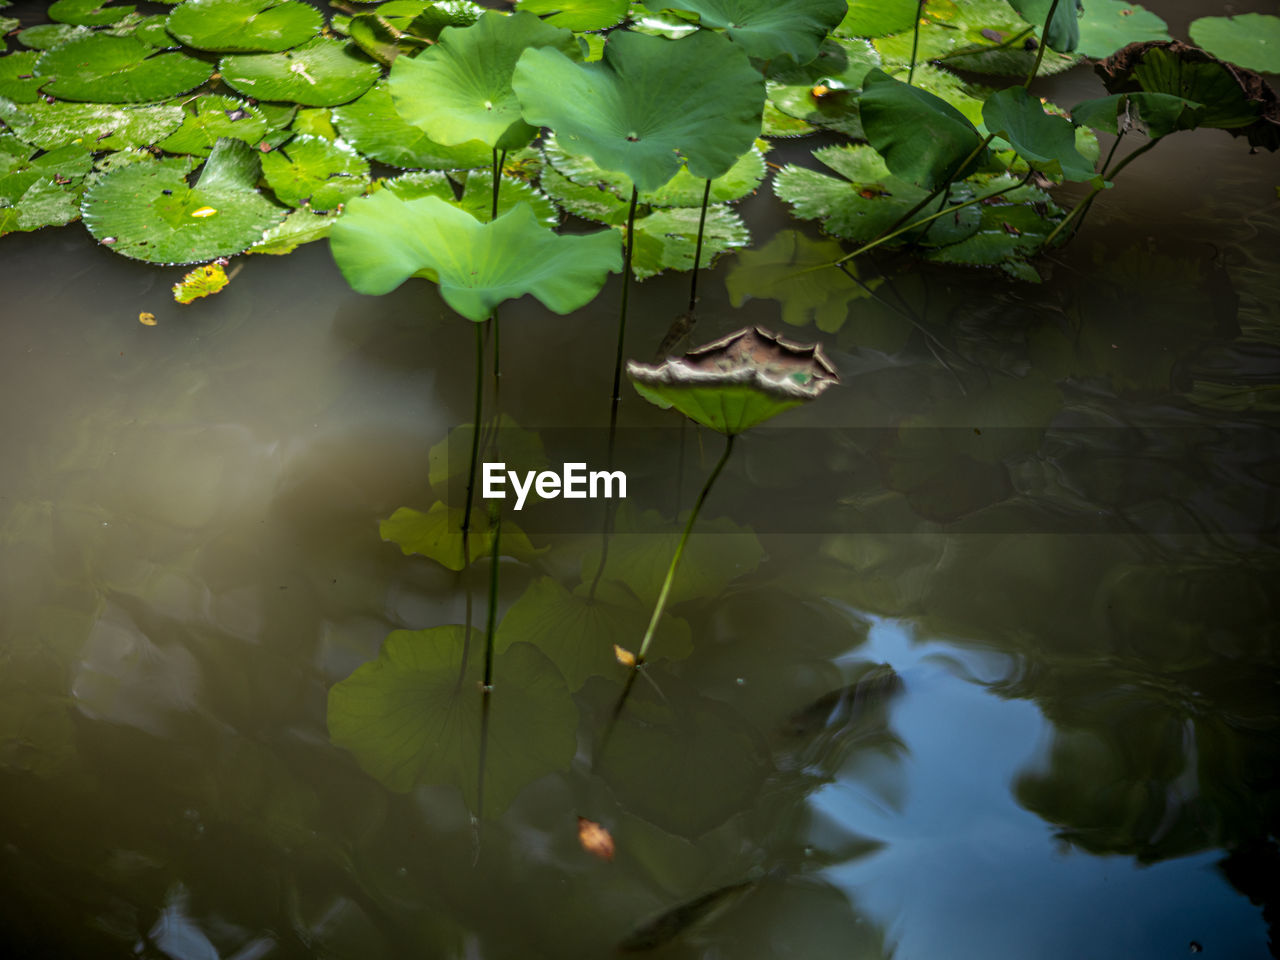 green, leaf, reflection, plant part, water, nature, lake, plant, sunlight, water lily, no people, tree, floating, floating on water, beauty in nature, growth, day, flower, aquatic plant, tranquility, outdoors, branch, environment, animal, animal themes, animal wildlife, standing water